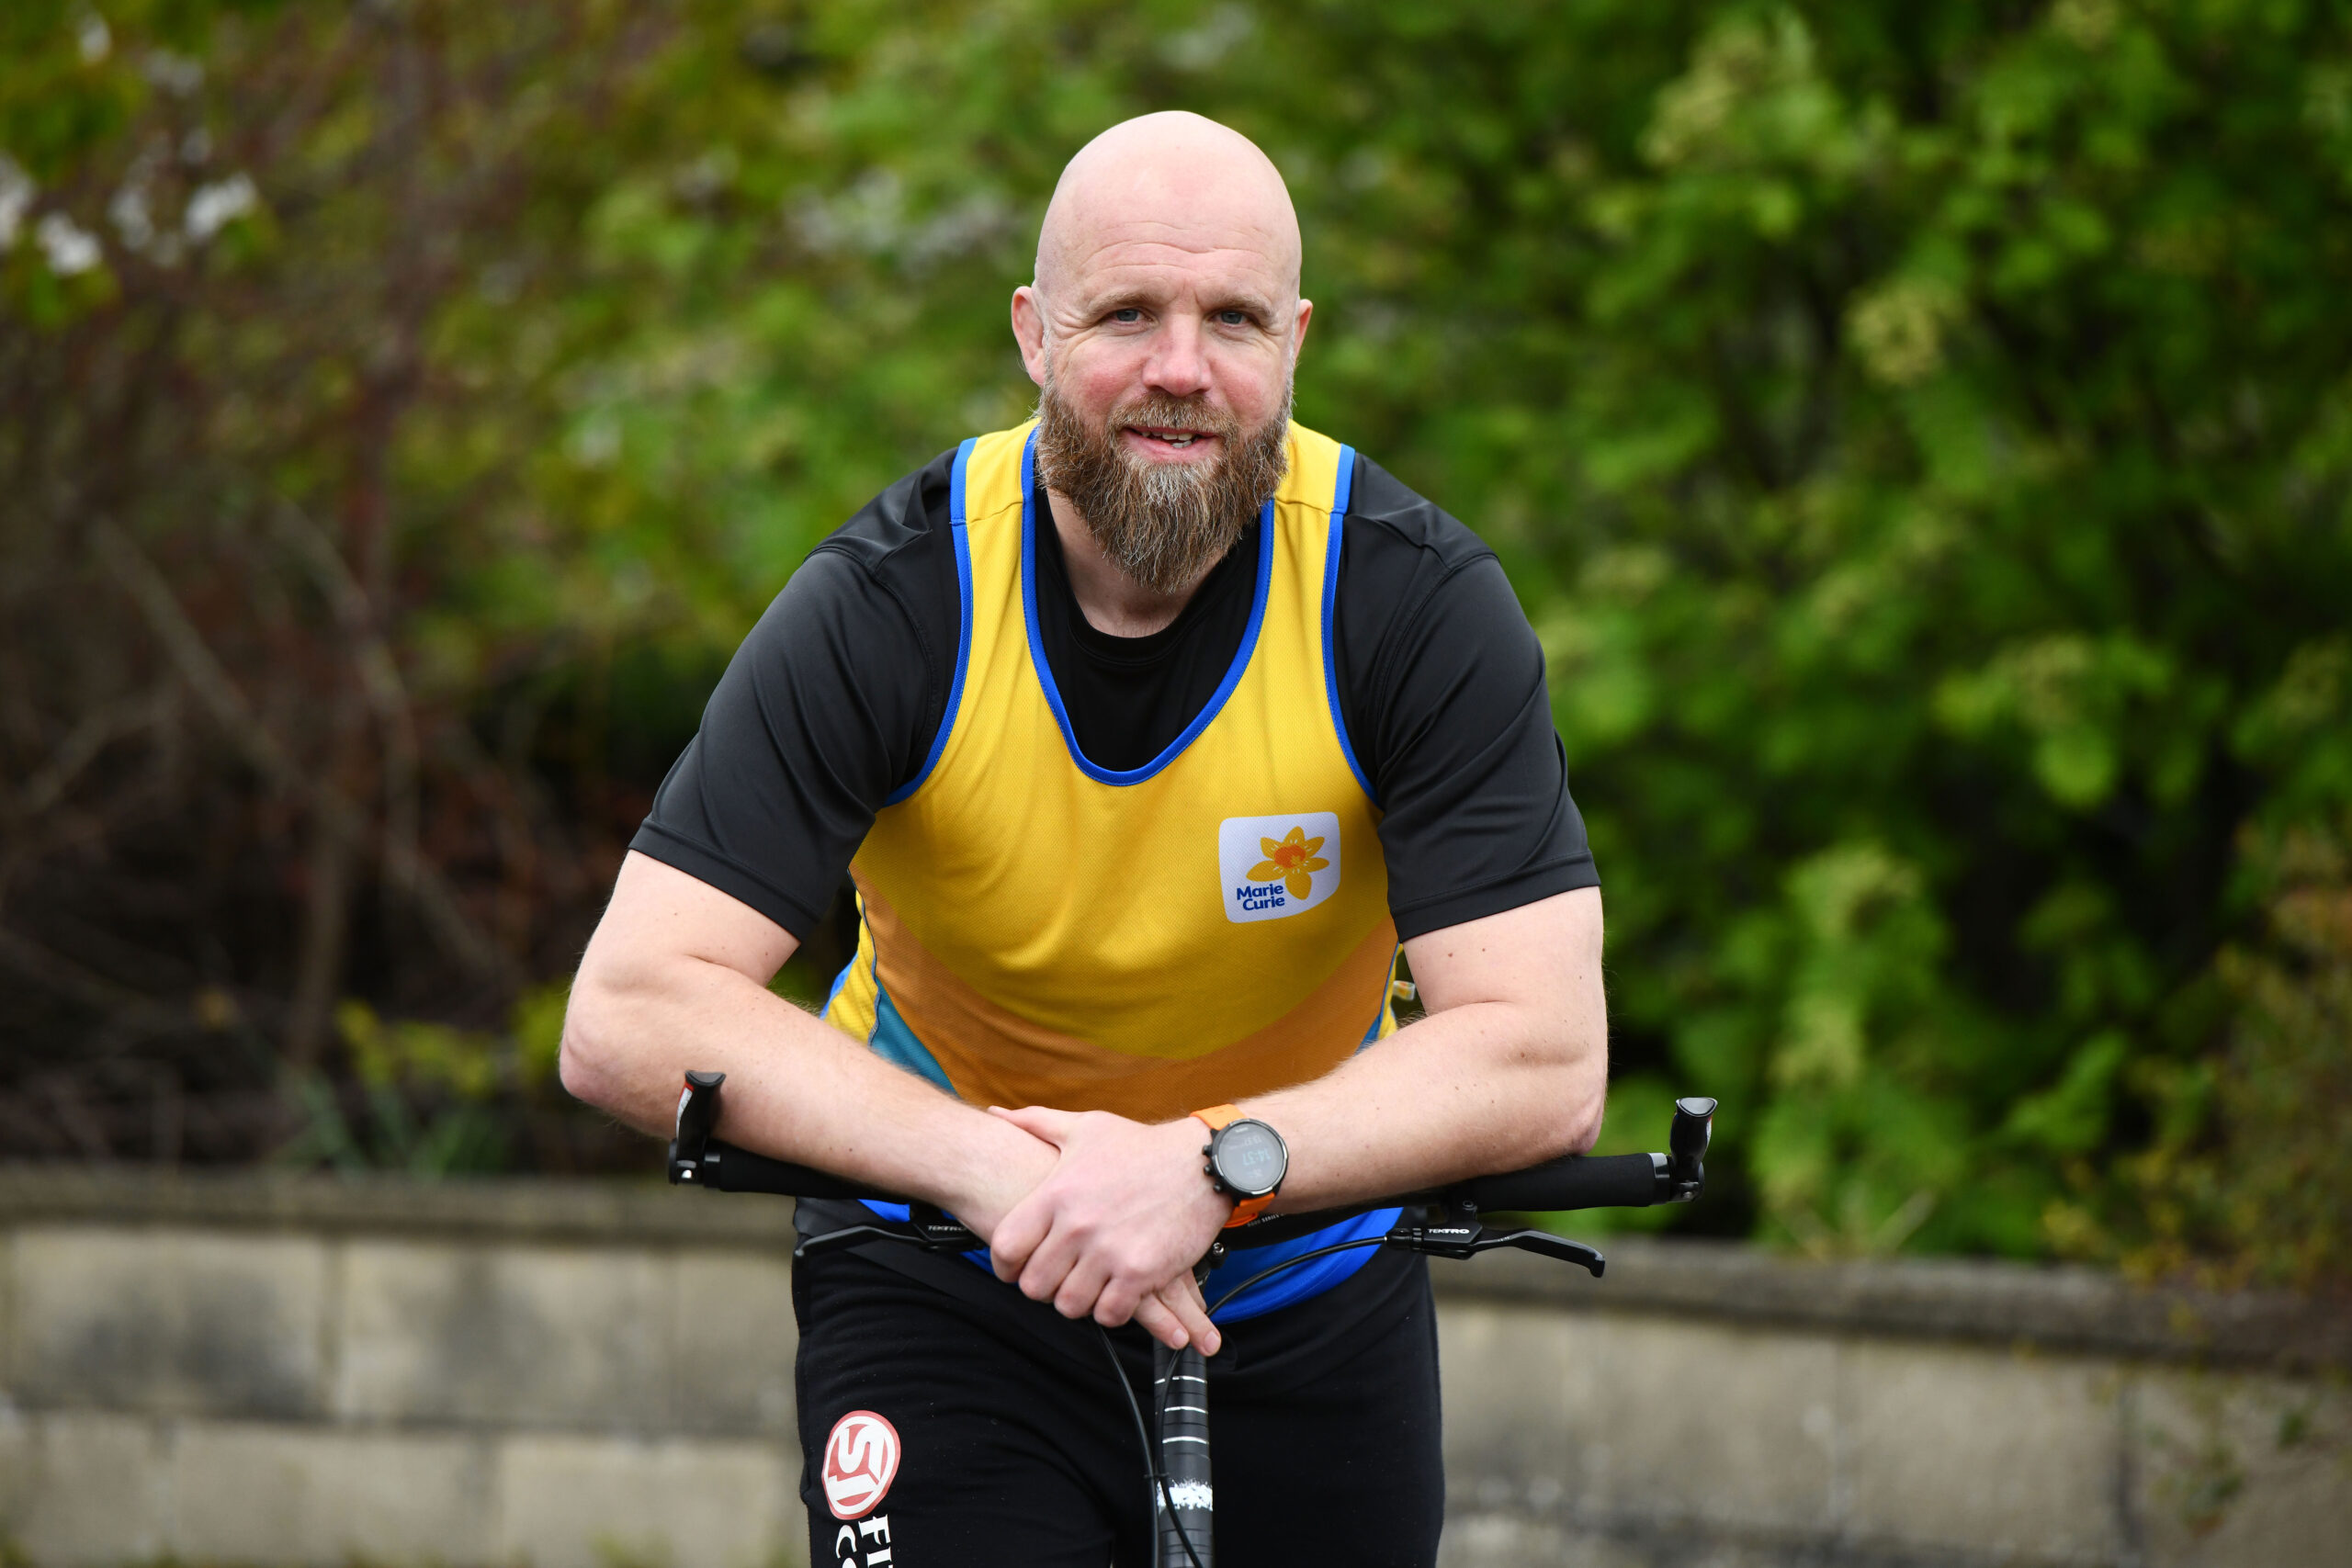 A dad has travelled from Land’s End to John O’Groats on a scooter in just 11 days – beating the previous world record. (JP Falkirk Herald/Zenger)